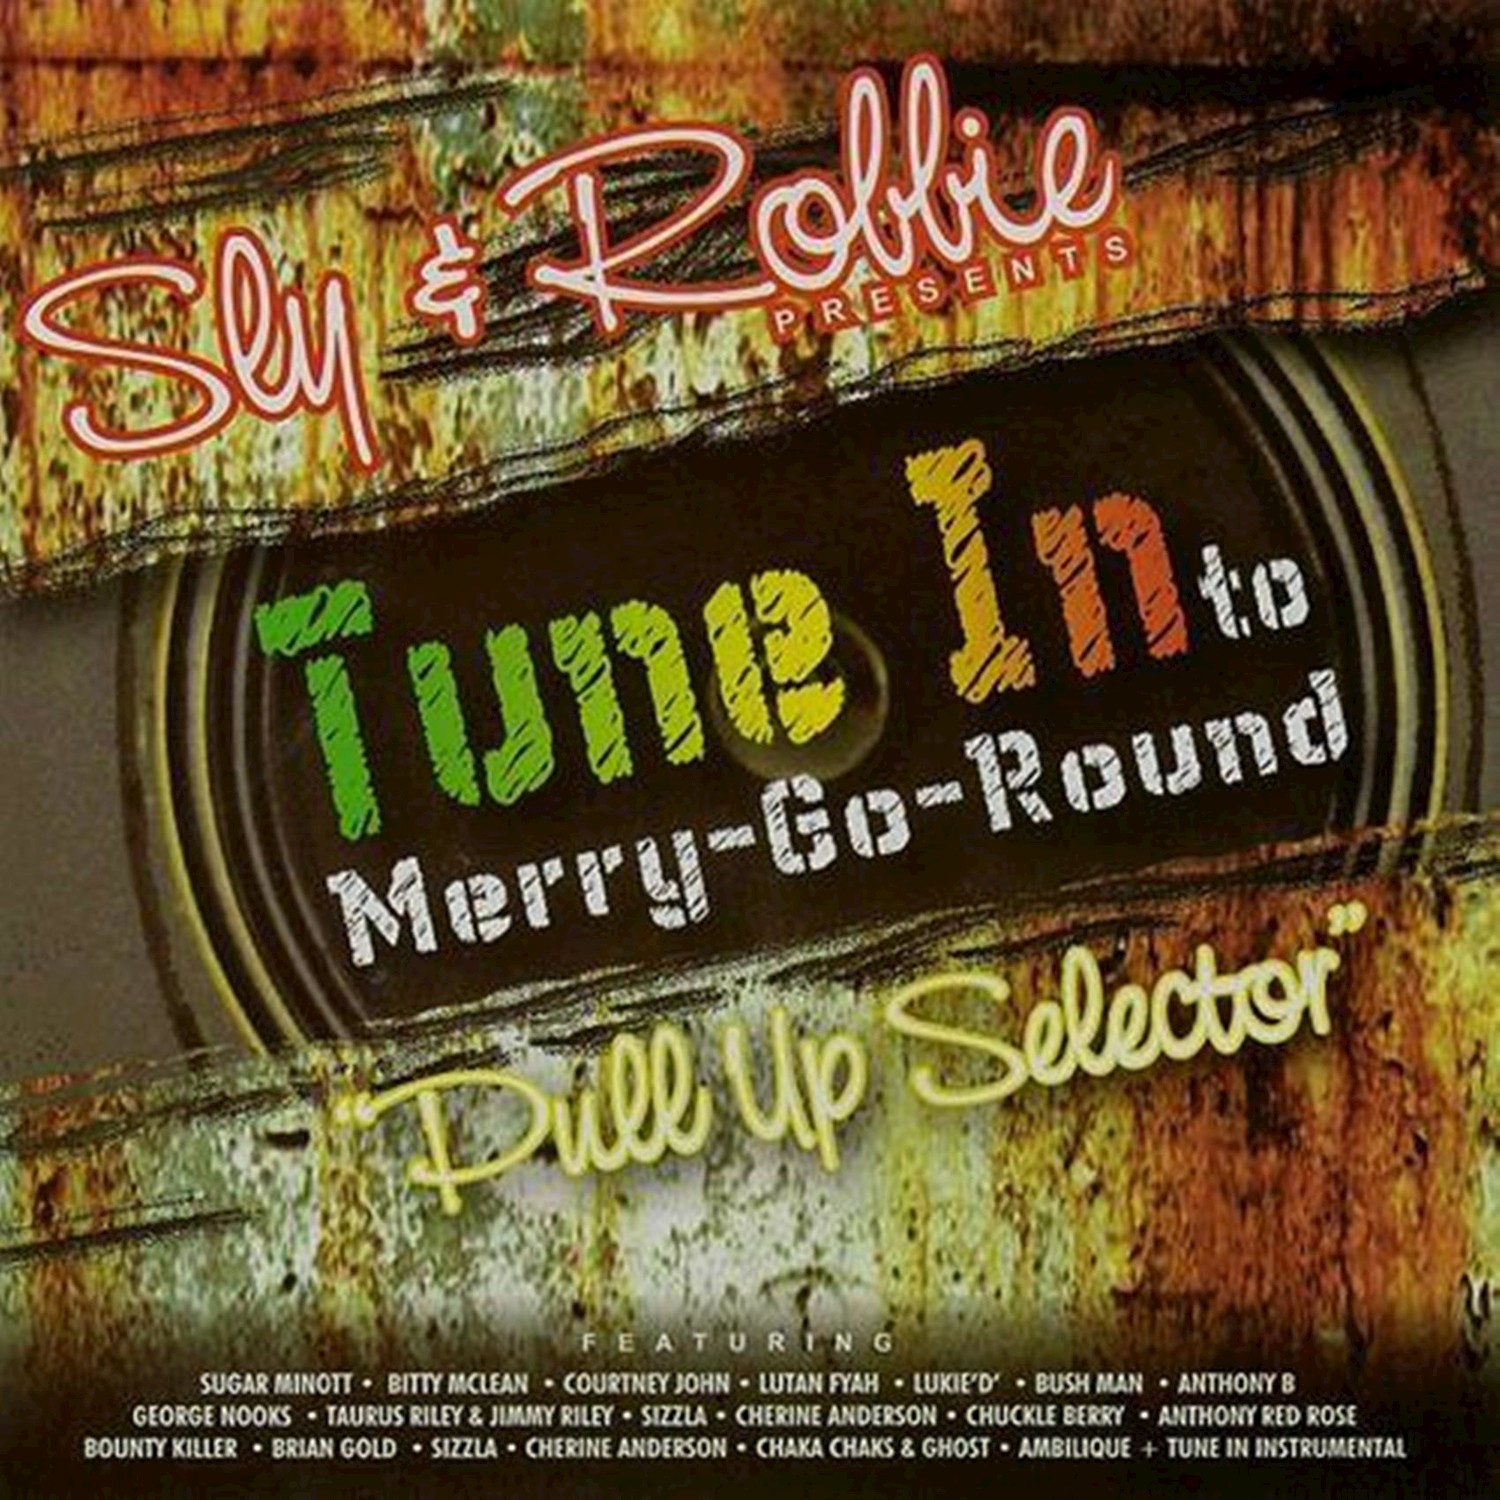 Sly  Robbie Presents: Tune into MerryGoRound ' Pull Up Selector' Remastered